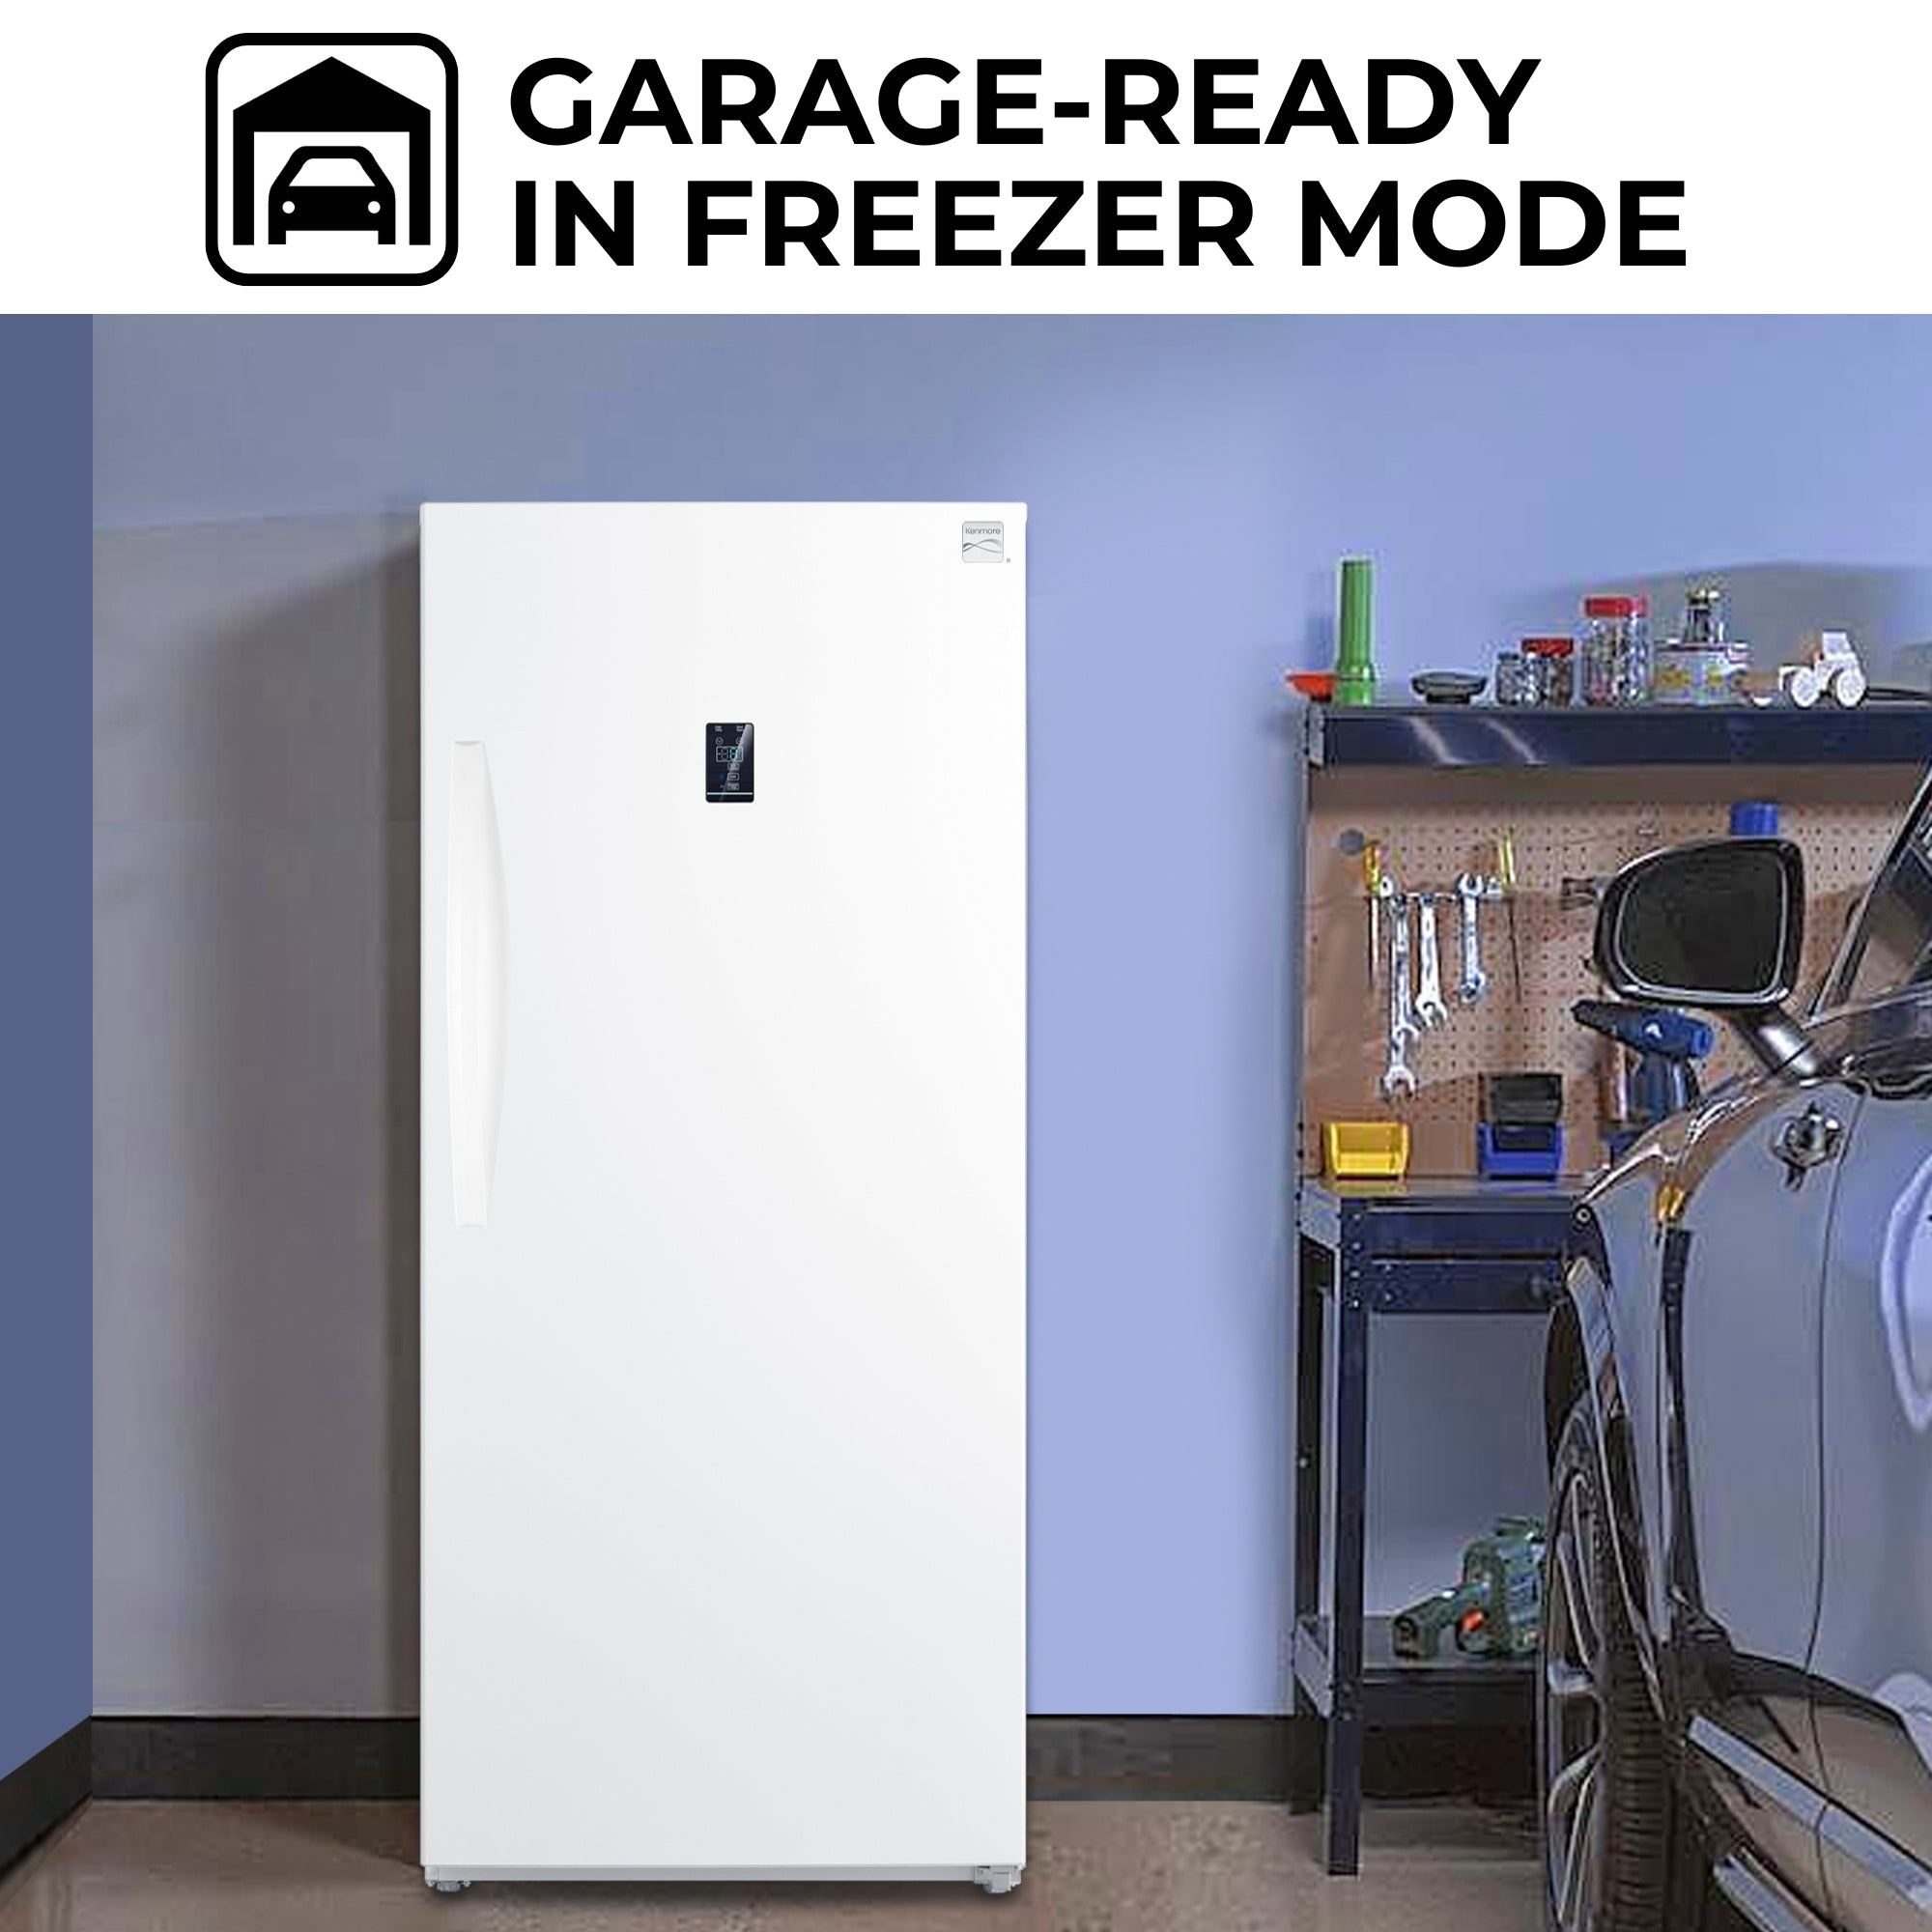 Four images show settings where the freezer could be used: Basement, cabin, kitchen, garage. Text above reads, "Garage-ready freezer"